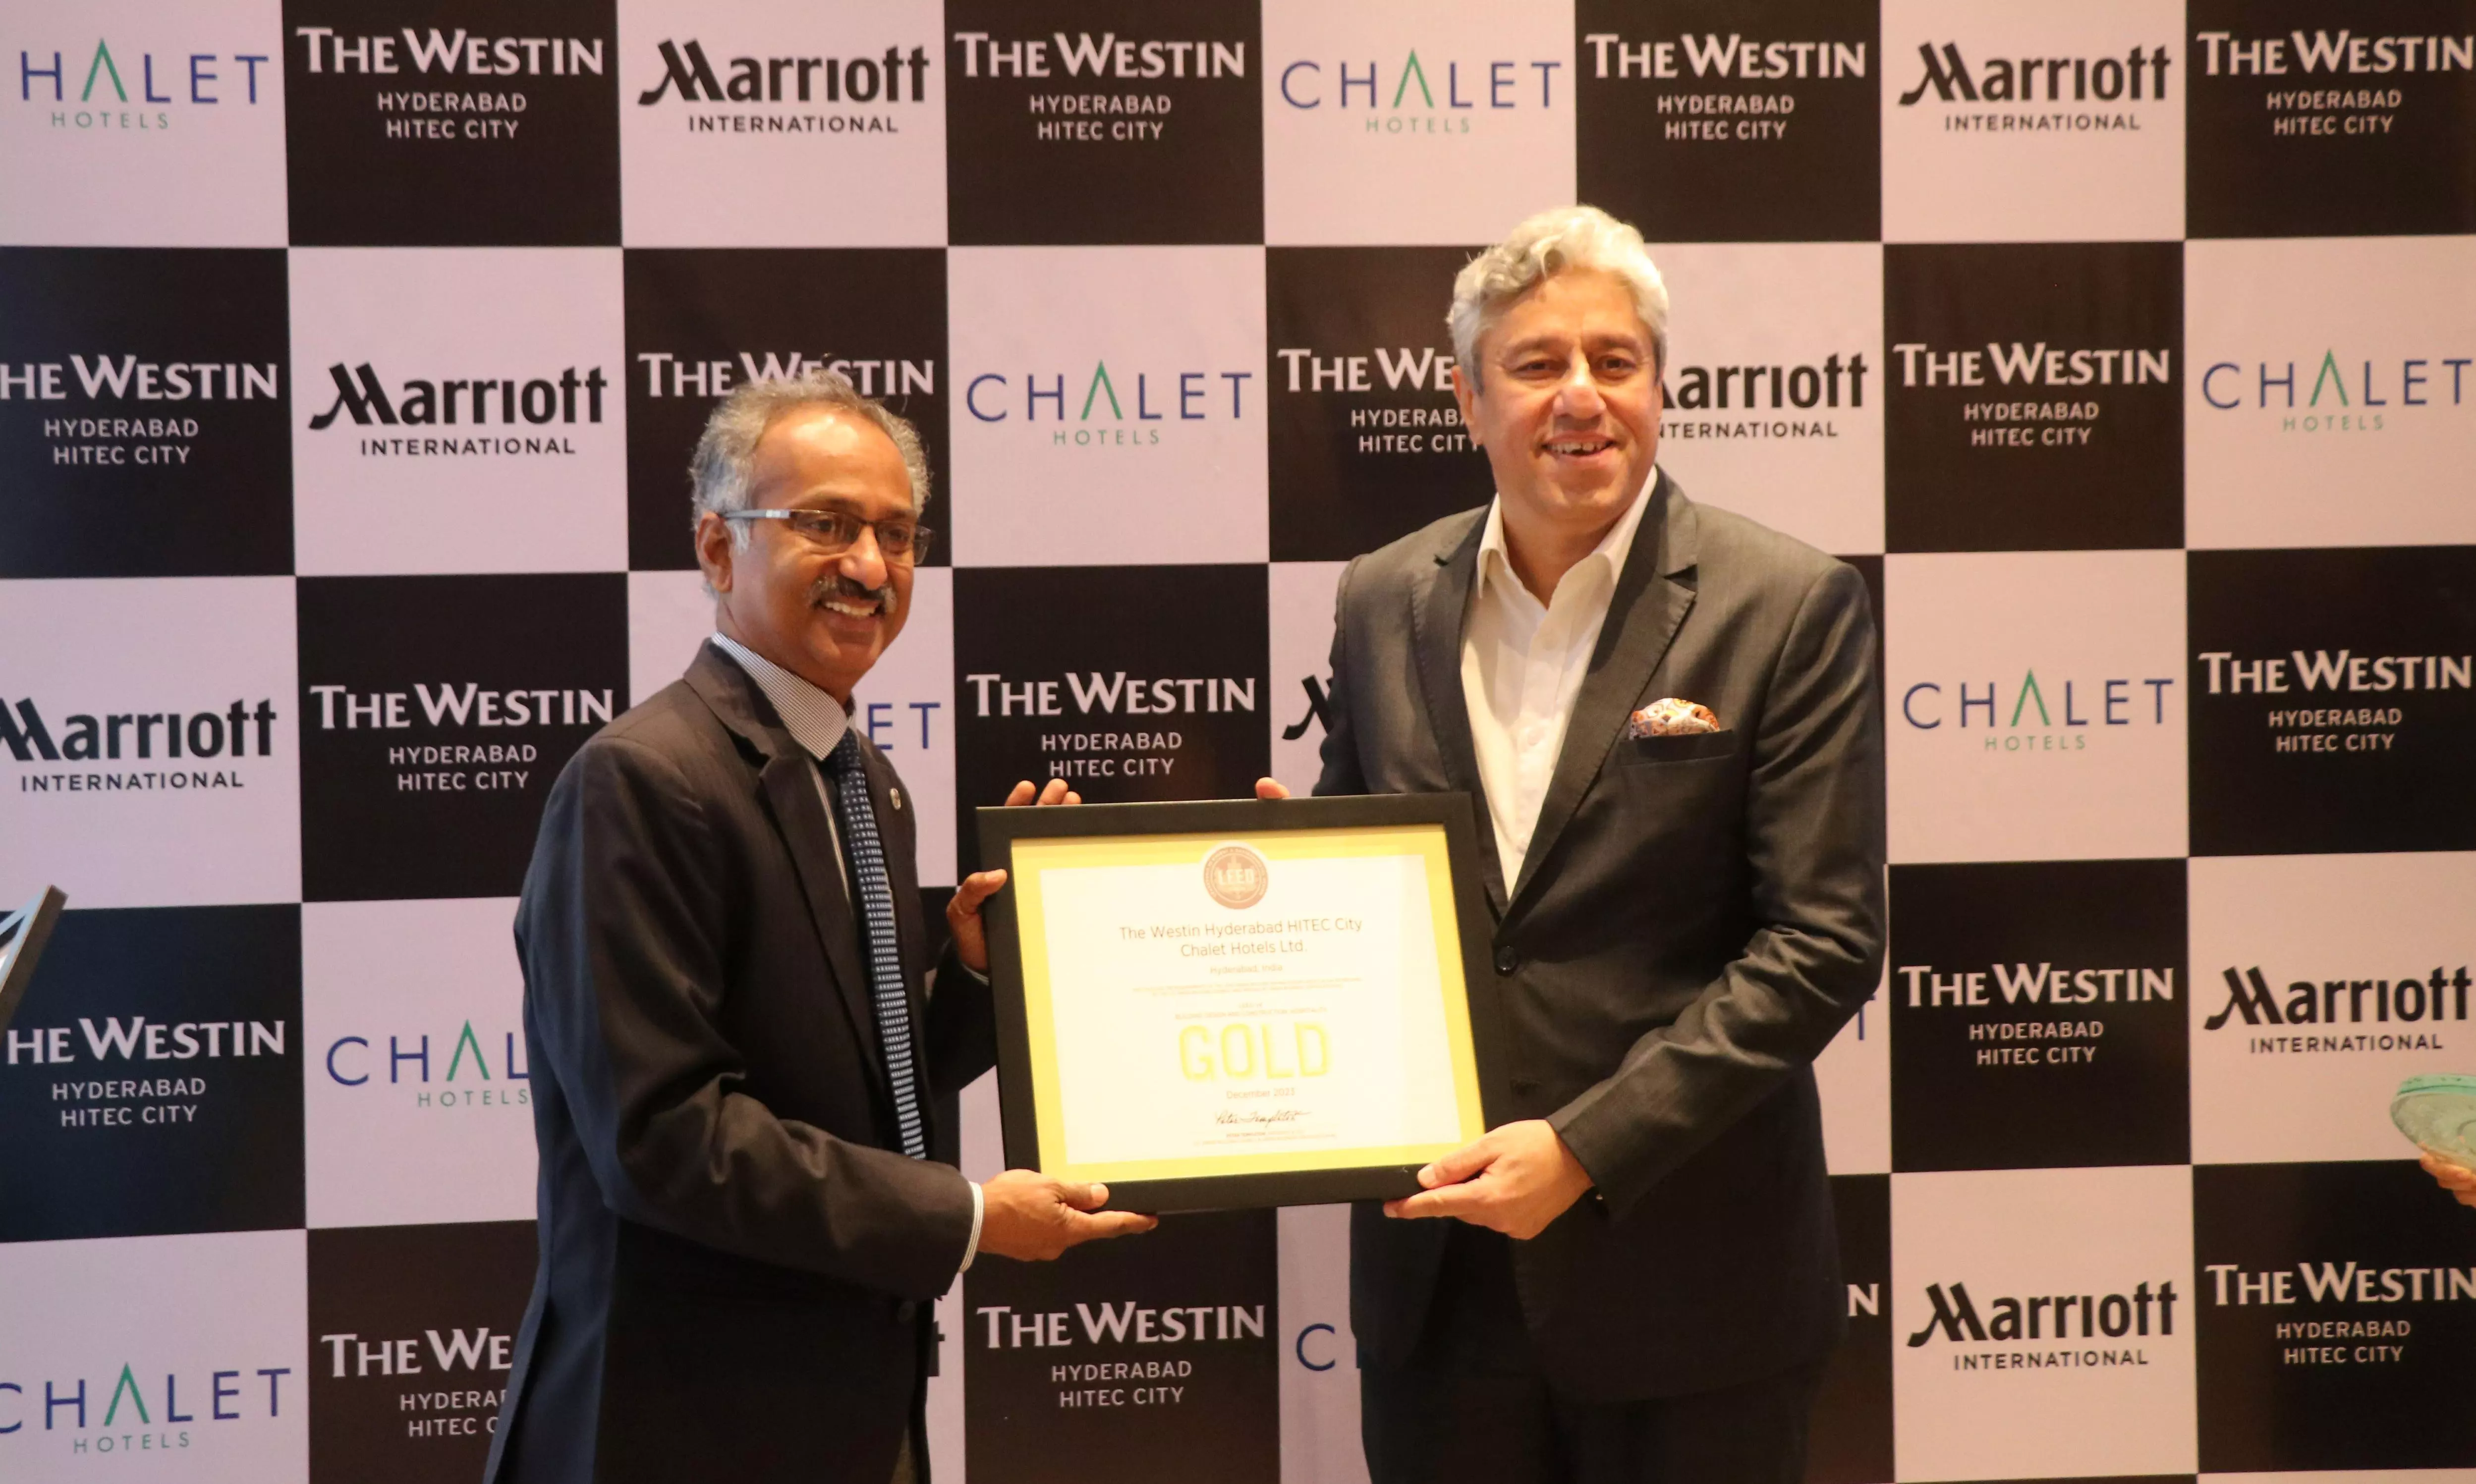 LEED Gold Certification For The Westin Hyderabad HITEC City